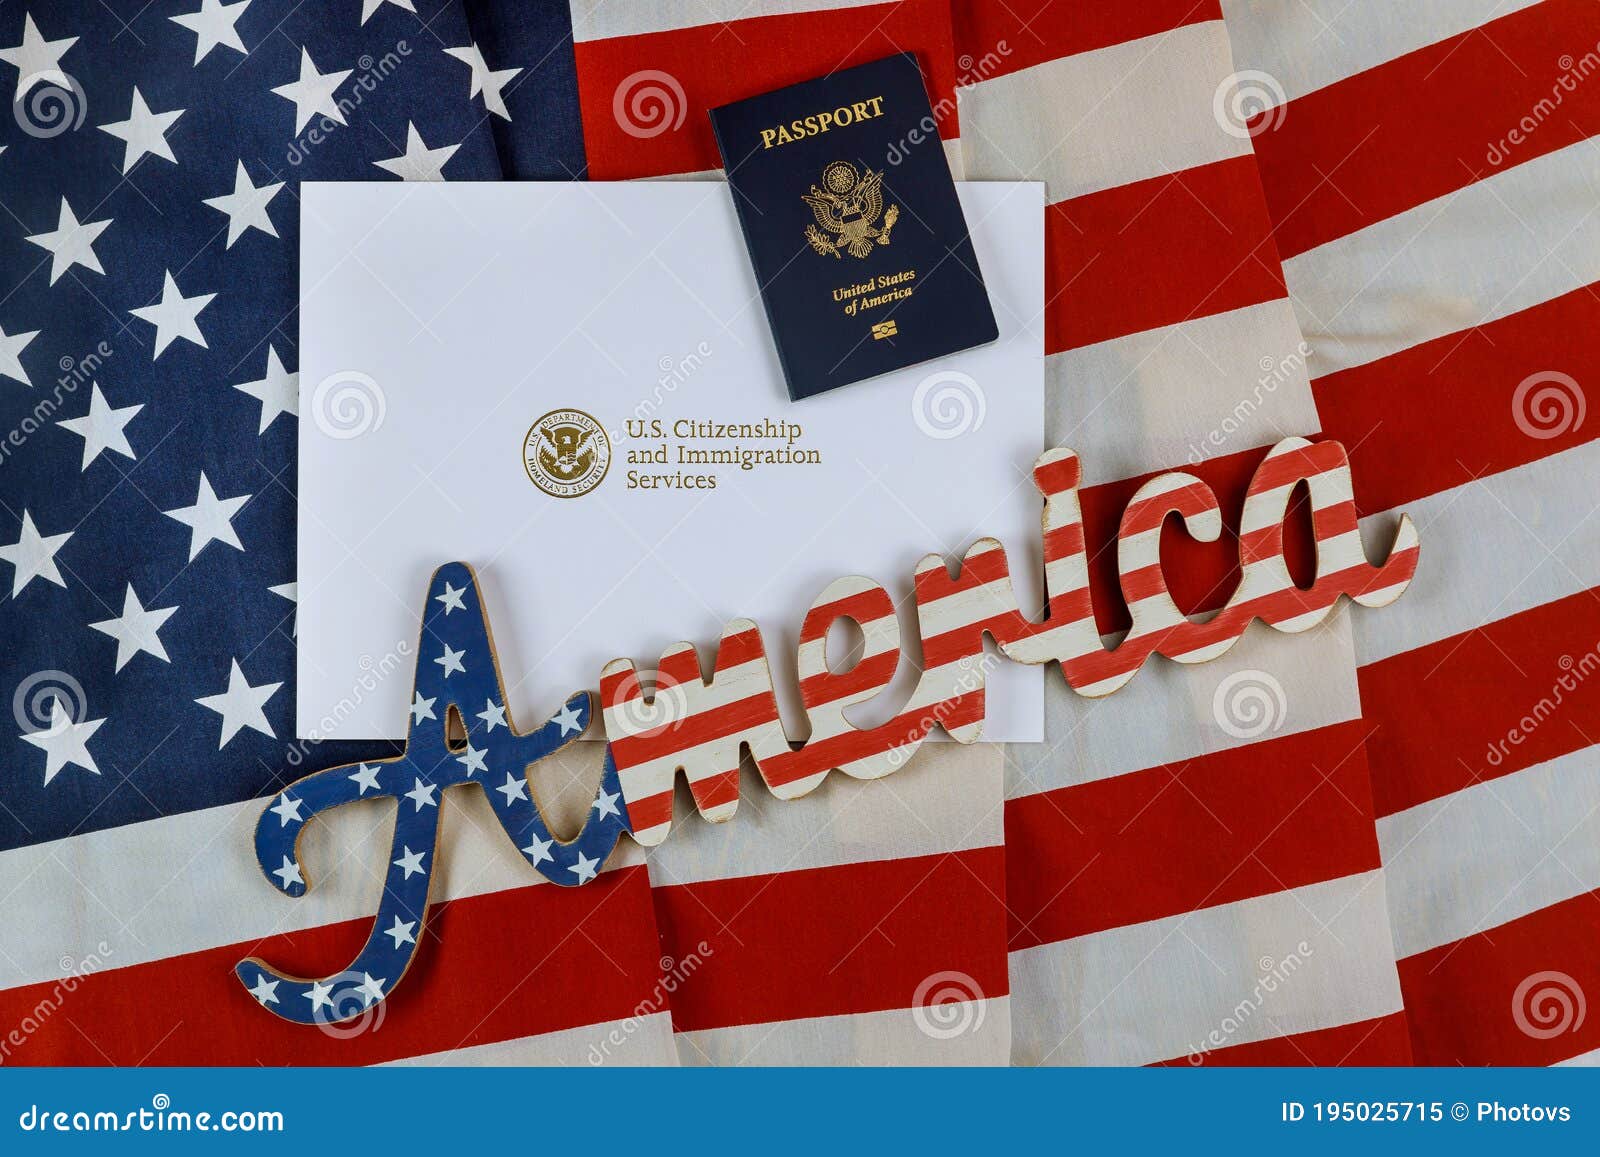 Letter from U.S. Citizenship and Immigration Services of naturalization with U.S. flag